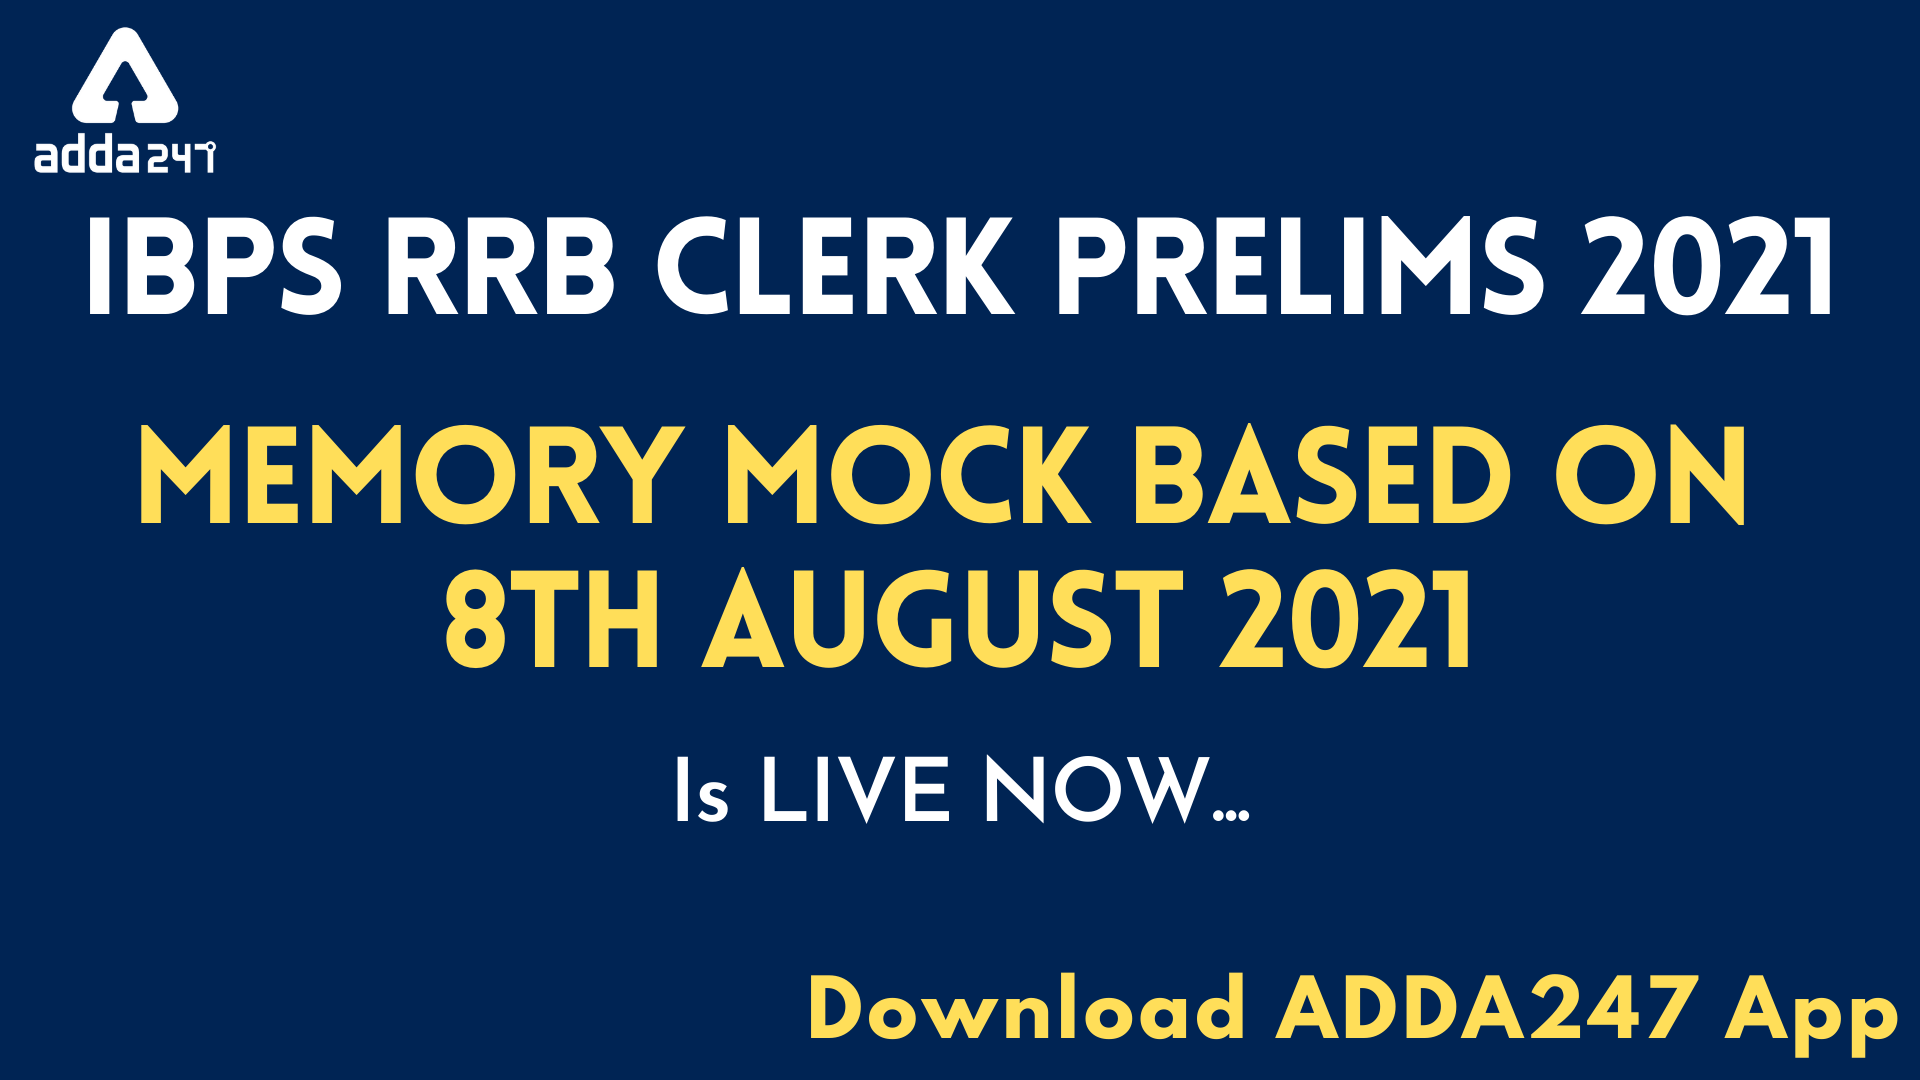 IBPS RRB CLERK PRELIMS 2021 | MEMORY BASED MOCK is LIVE NOW | Attempt for Free on Adda247 App_40.1